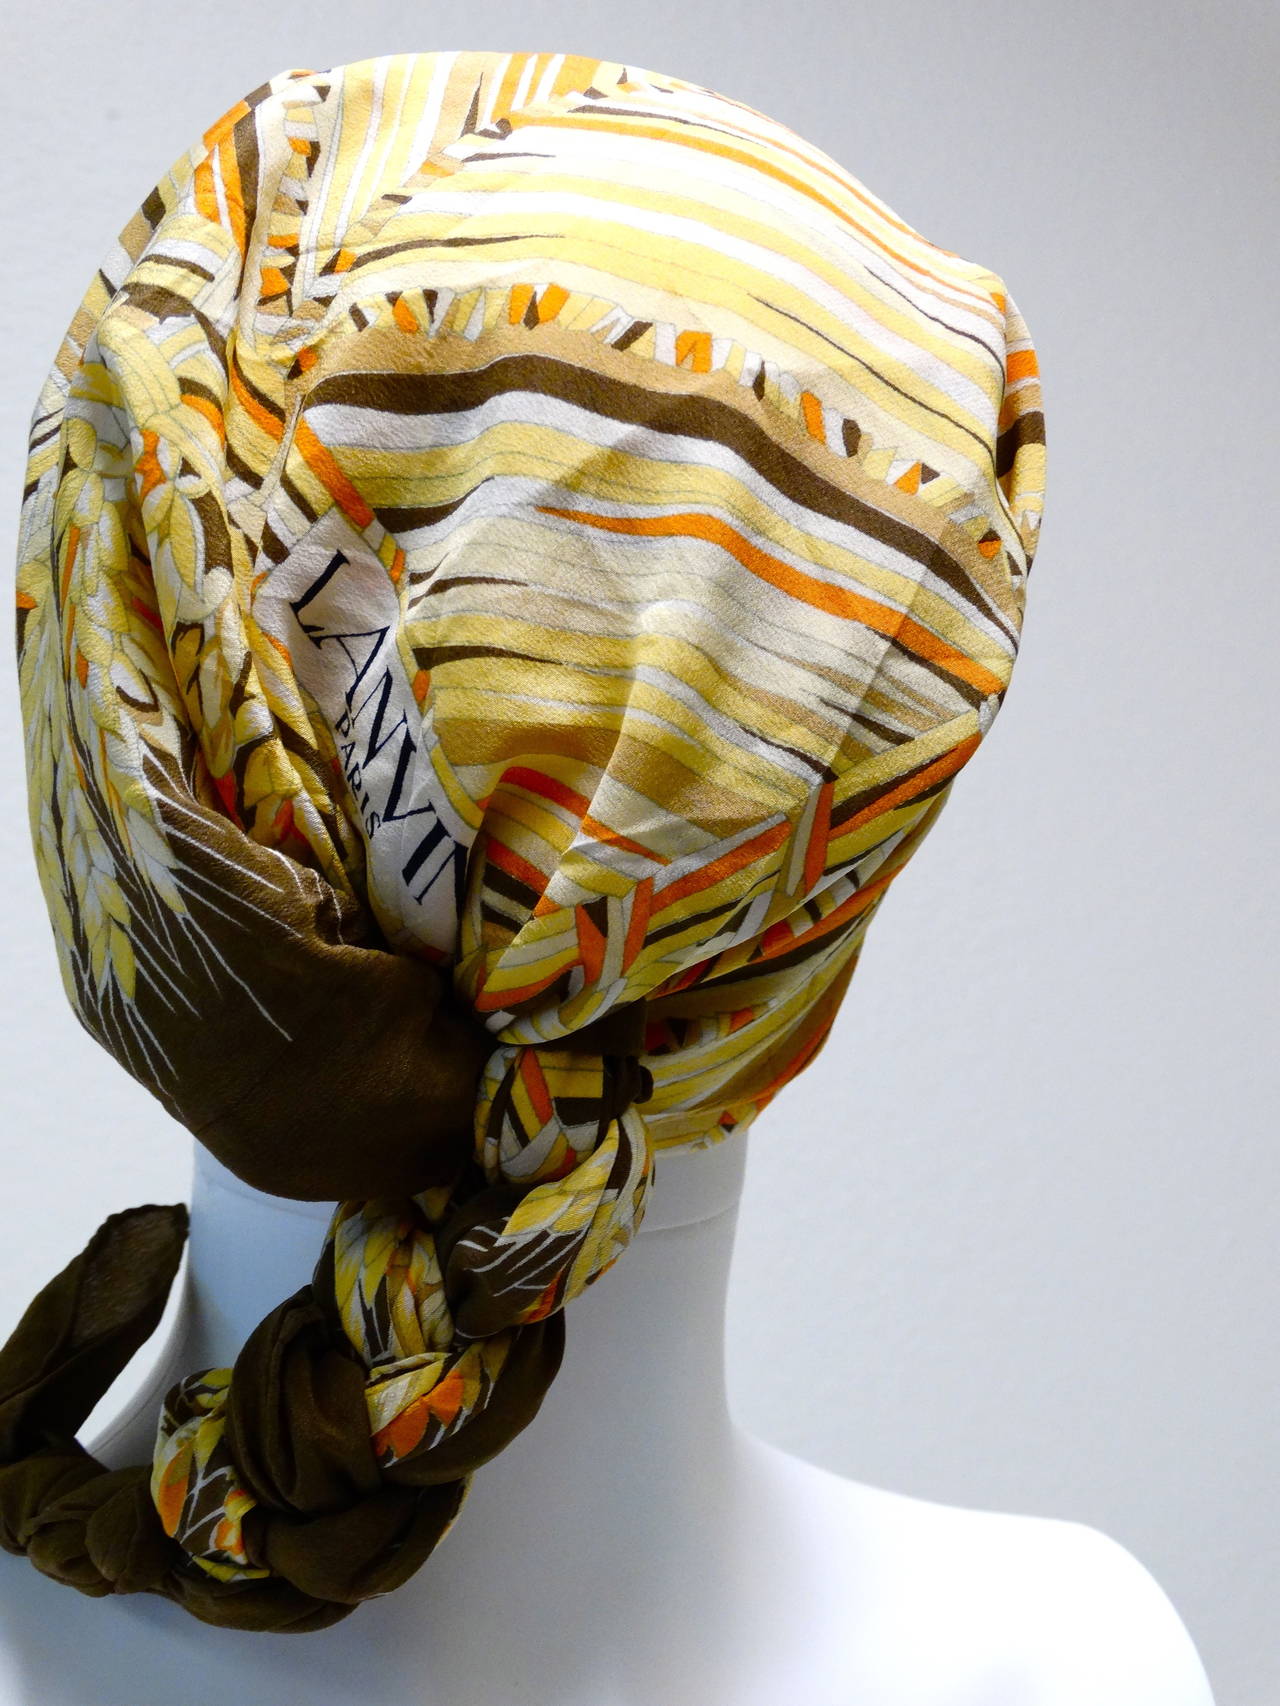 Rare 1970's vintage Lanvin silk scarf with wheat and diamond pattern motif. 
32 x 32 Hand-Rolled hem. With tag: Colors: browns, golds, orange, white, light yellow. Where this lovely scarf wrapped on your head or tie it on your favorite handbag!